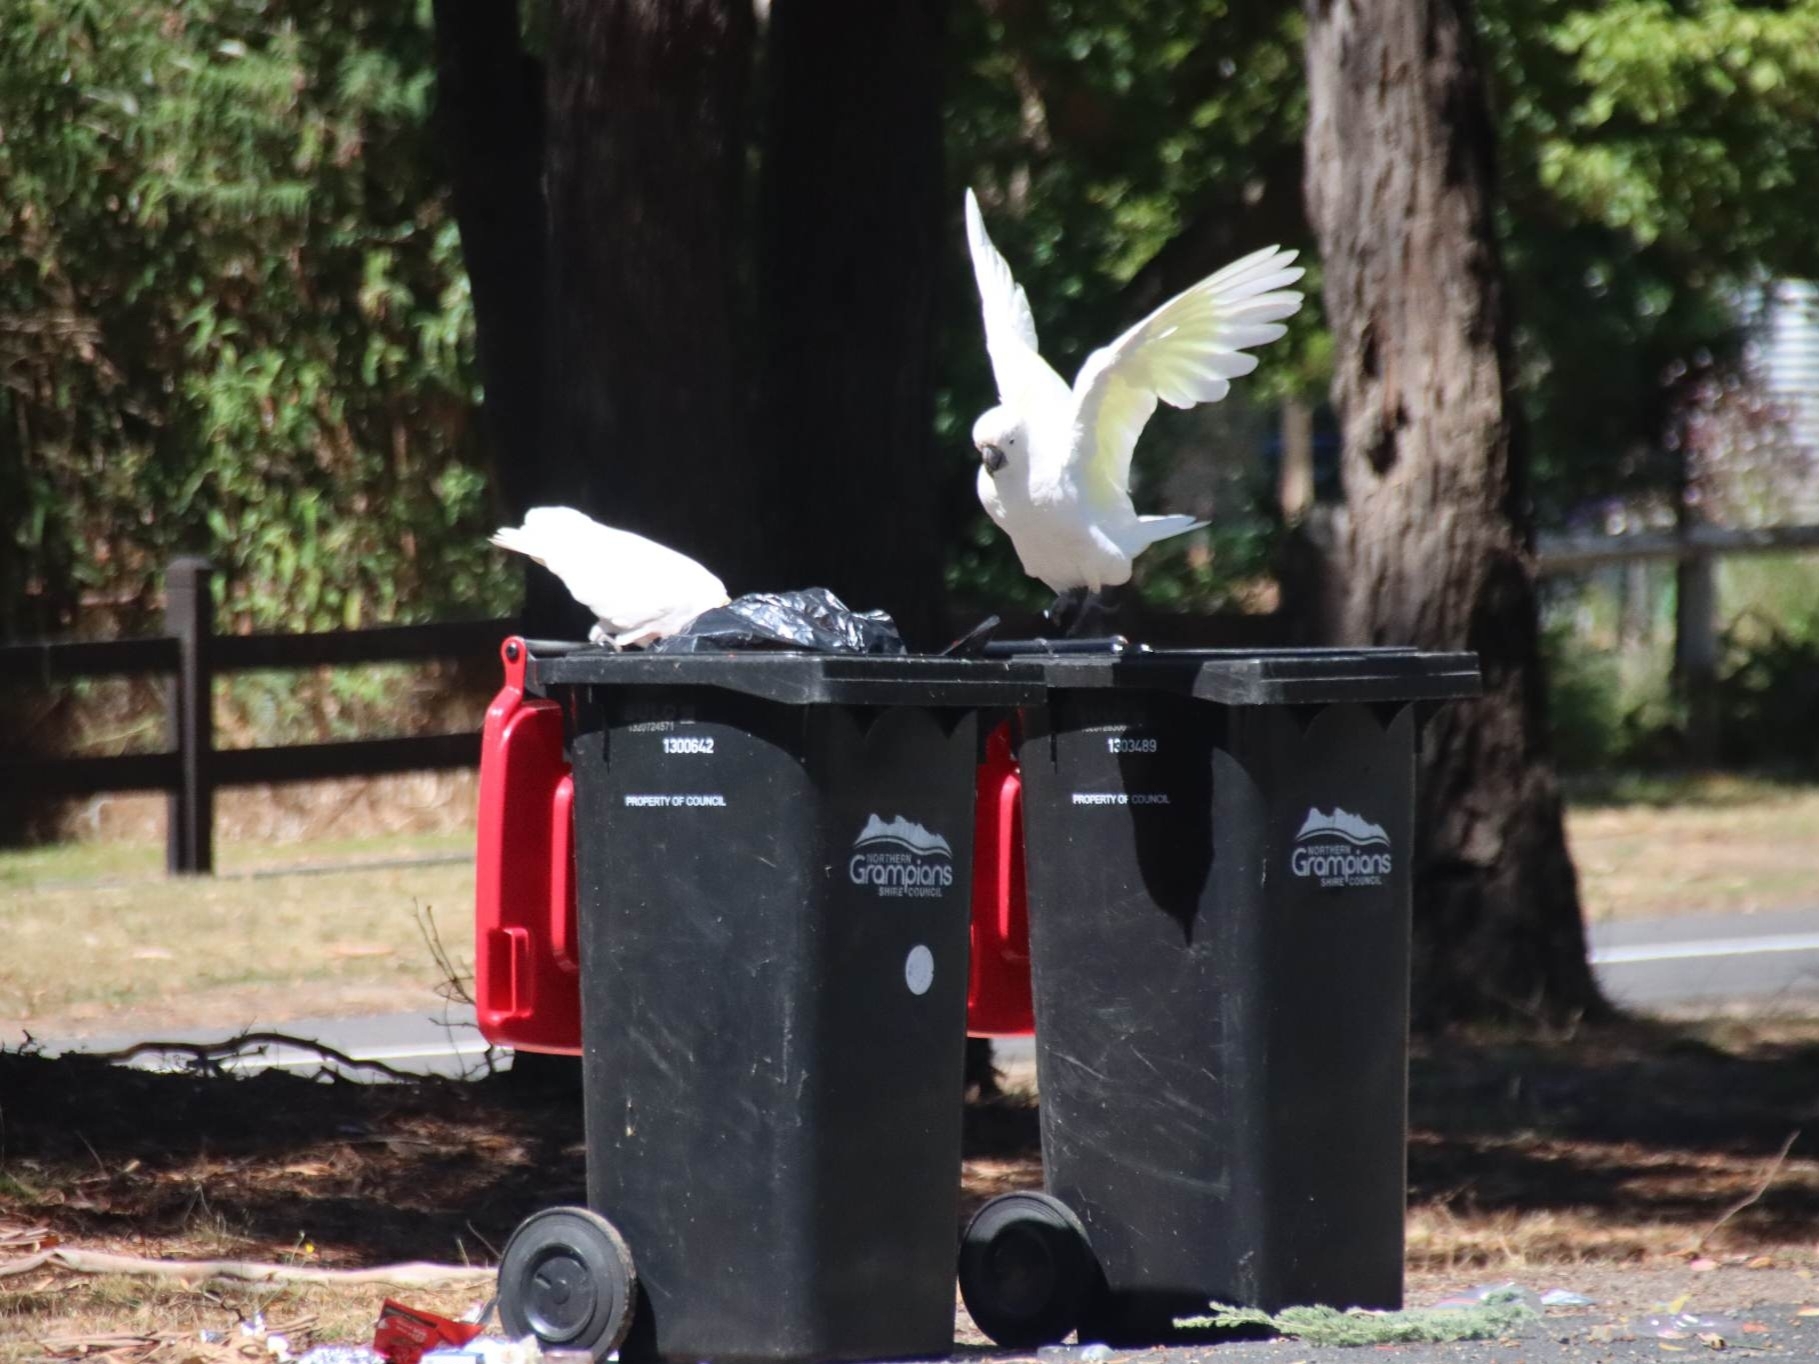 One Sulphur-crested Cockatoo has its head buried in a trash bin, while the second bird leaps excitedly with its white wings spread—it spots something tasty.